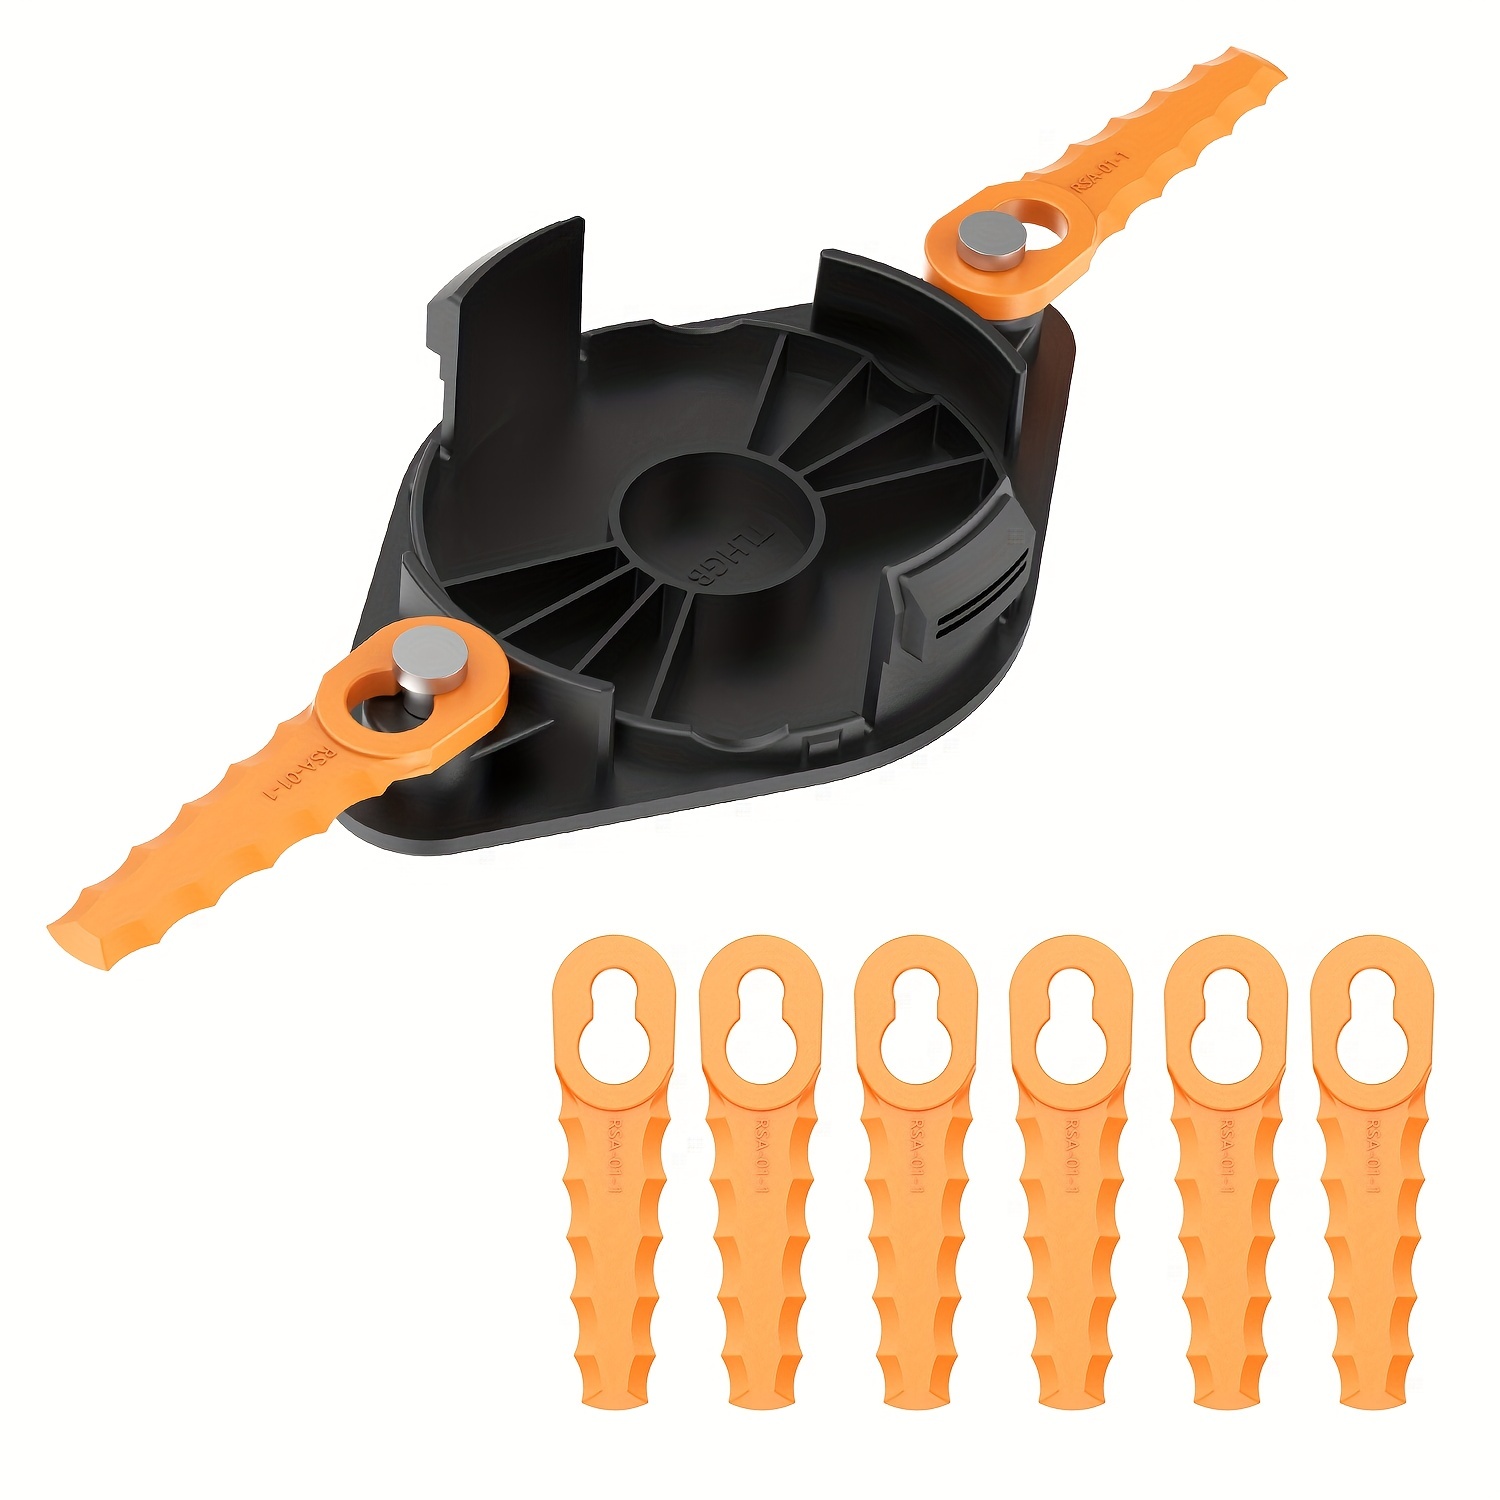  NTSUMI Polycarbonate Replacement Head Blades Replace AF-100  Fit for Black Decker GH900, GH912, GH600, GH400, GH500, LSTE525, LST300  String Trimmers, with 12 Pack Flexible Replacement Blades, 14 Pcs : Patio